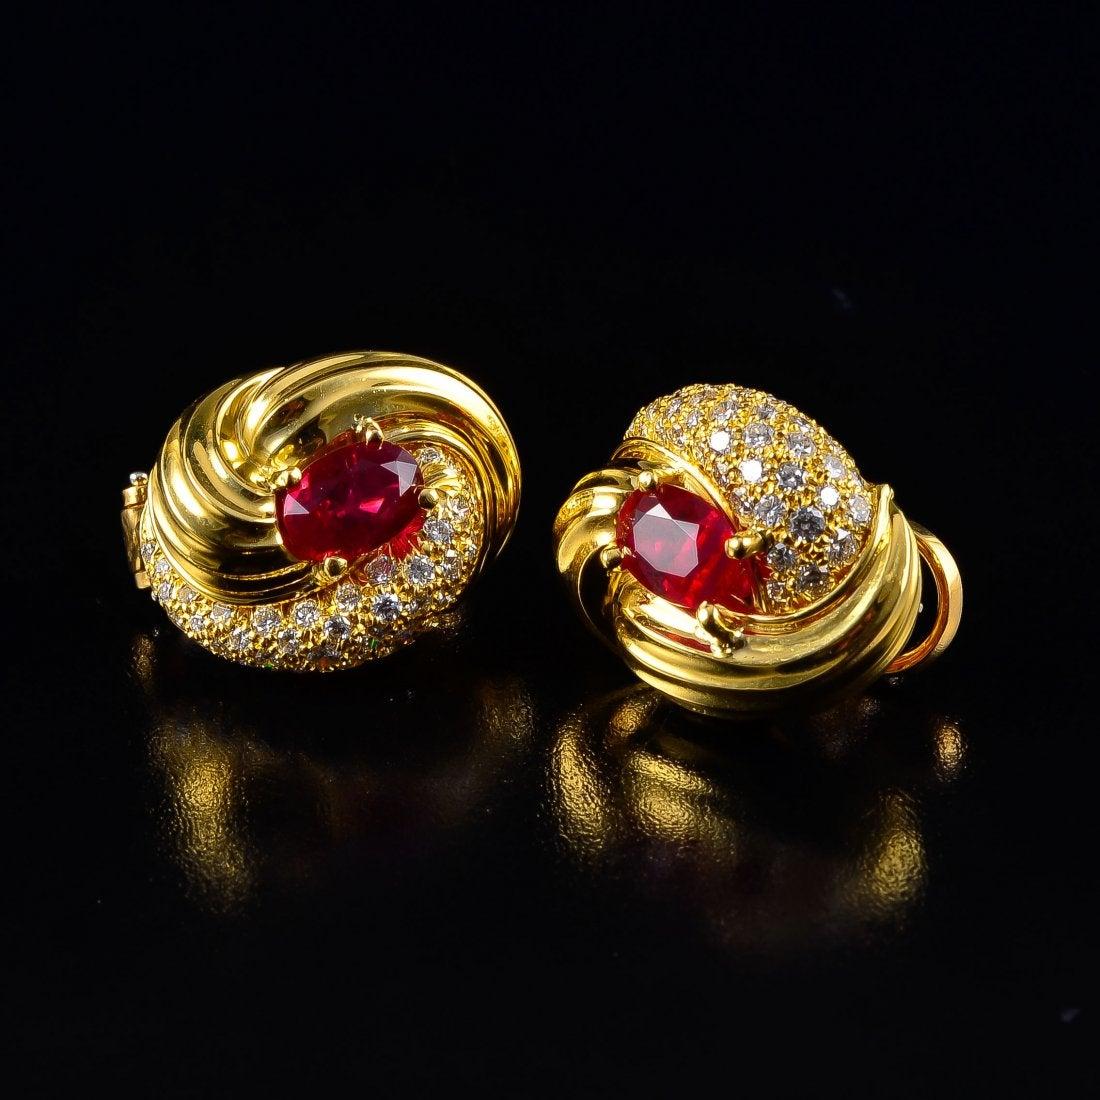 A stunning pair of vintage 1980's 18k gold, ruby and diamond earrings by Henry Dunay, 

The earrings of knot form, with a well matched pair of bold and bright Burmese rubies at the center - approximately 3.45ct total. 
One side of each earring pave